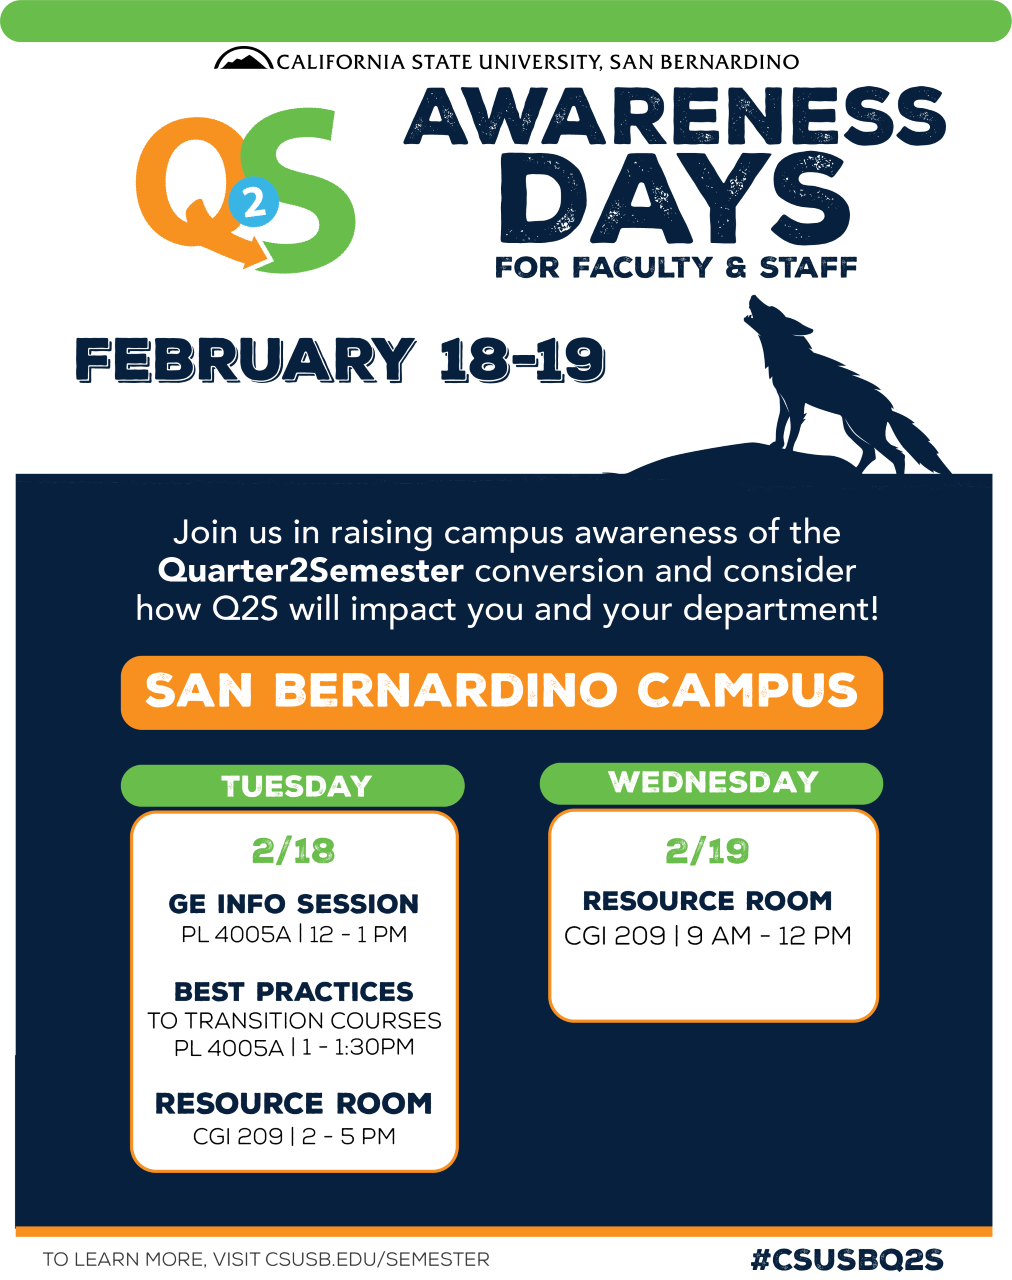 Q2S Awareness Days for faculty and staff set for Feb. 18-19